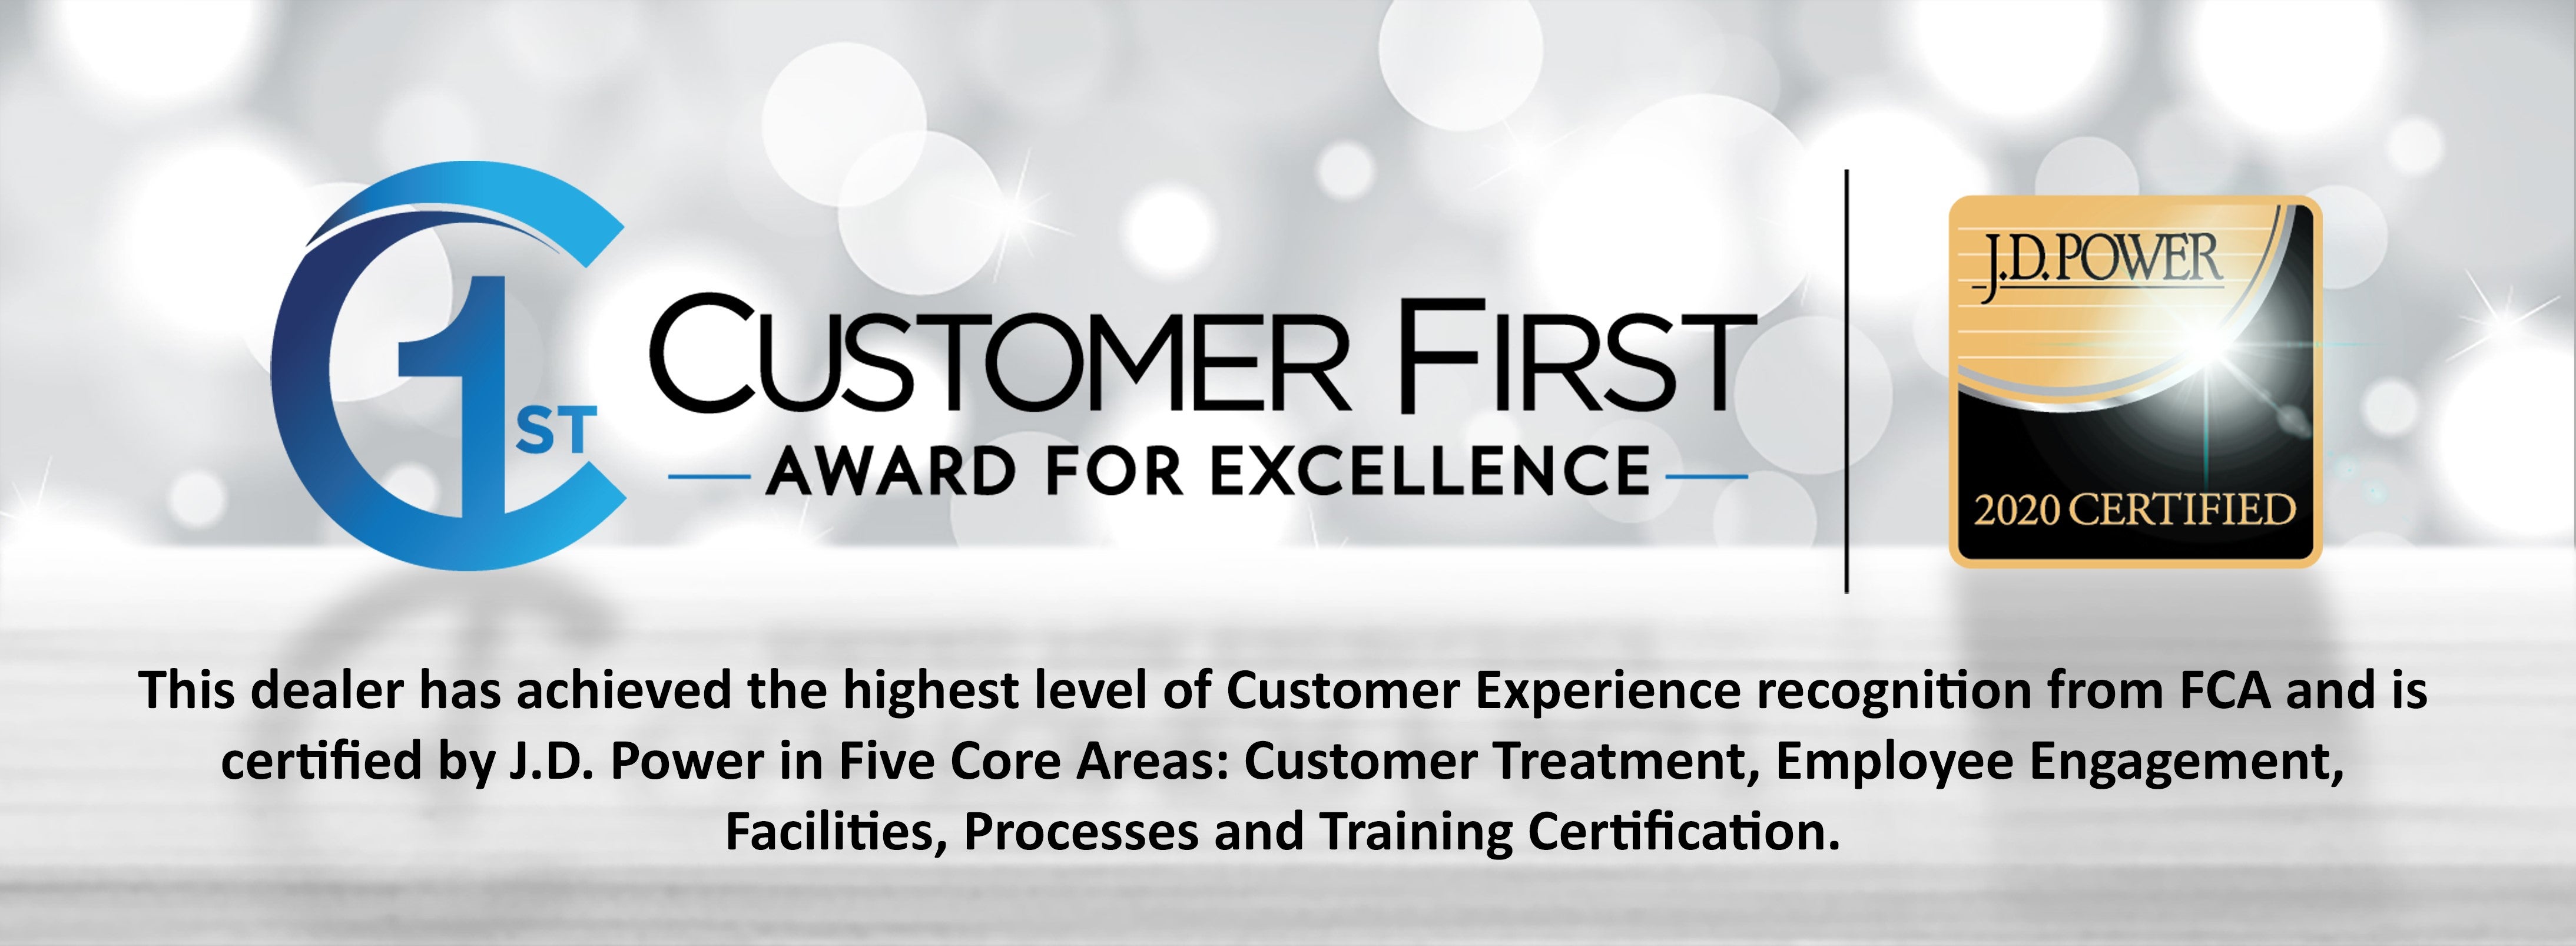 Customer First Award for Excellence for 2019 at Dutch Miller Chrysler Dodge Jeep RAM of Ripley in Ripley, WV